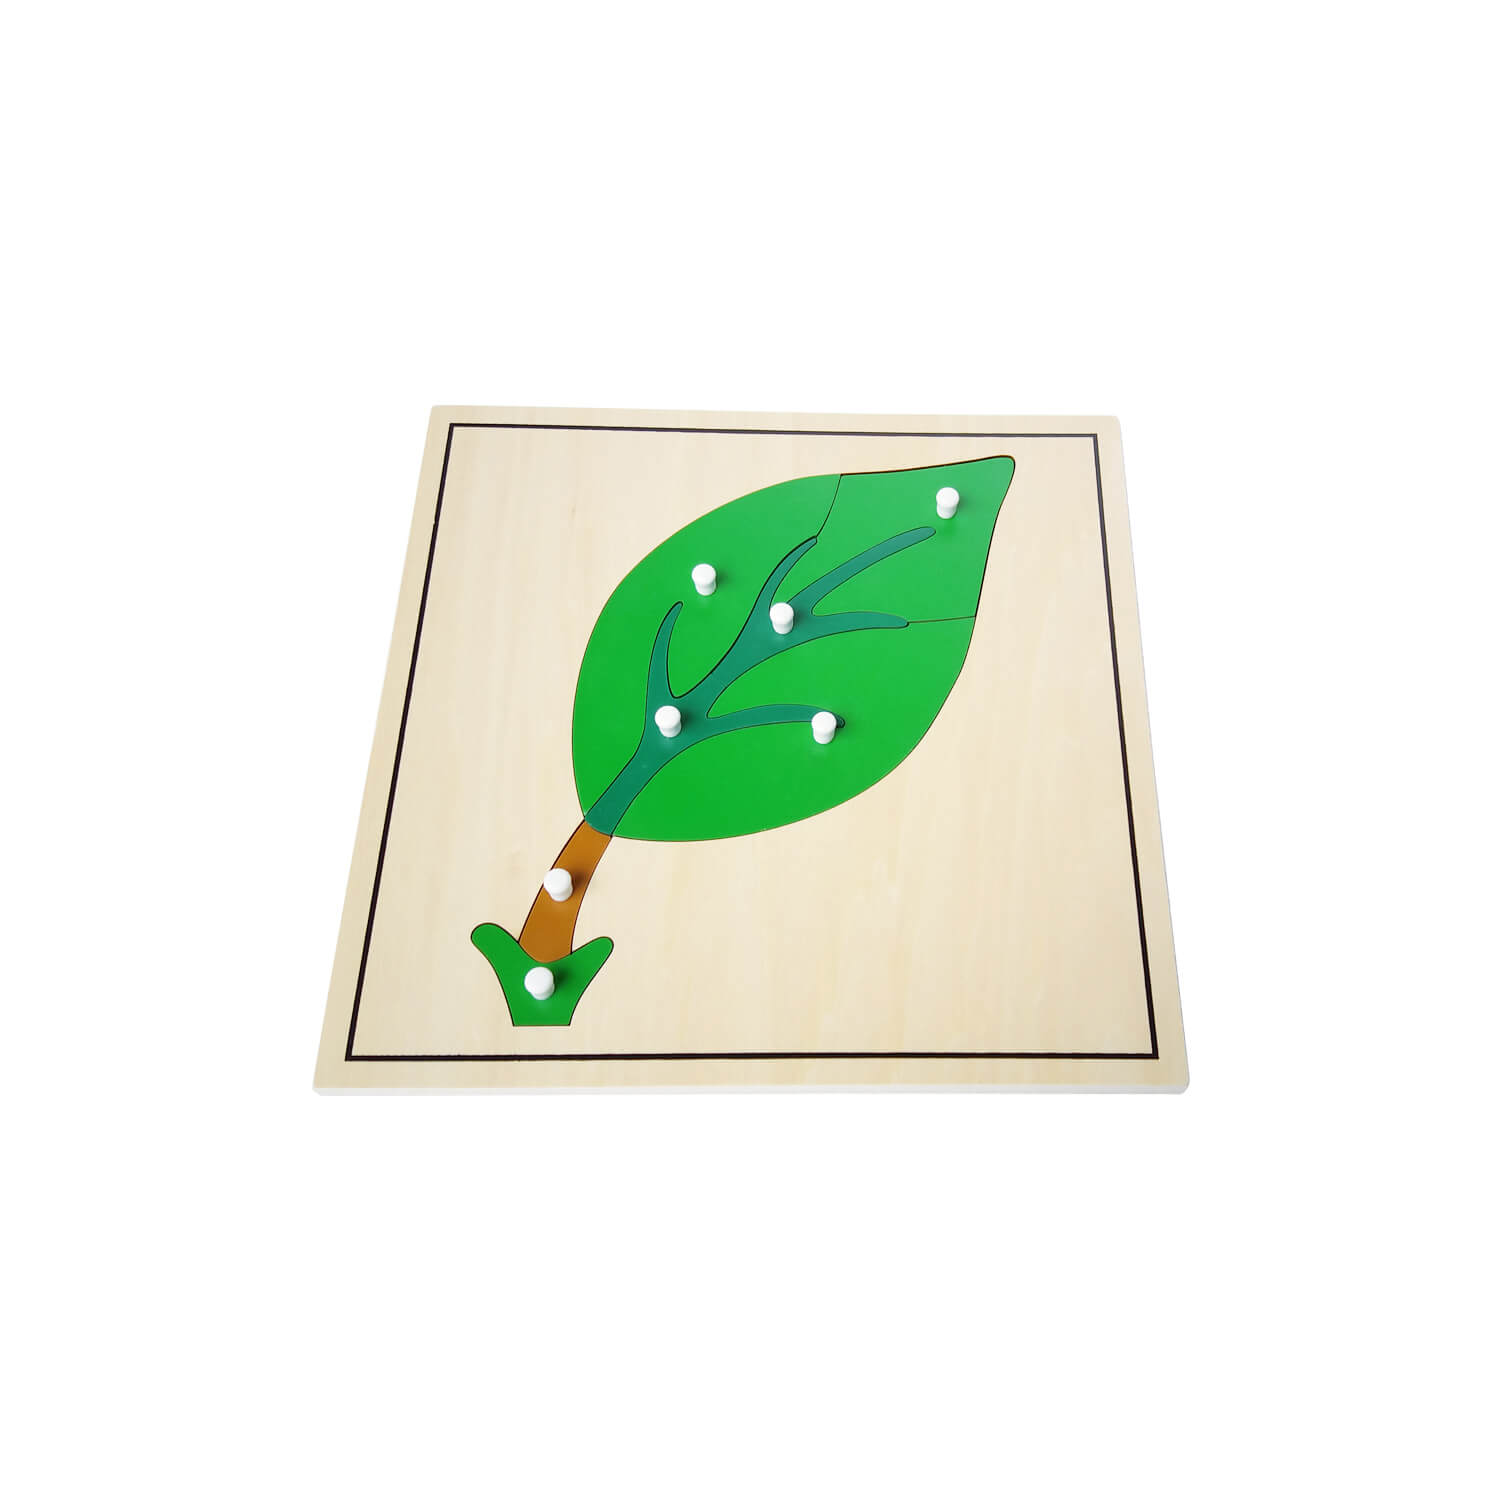 NEW Montessori Botany Material-NEW PLYWOOD Parts of a Leaf Puzzle